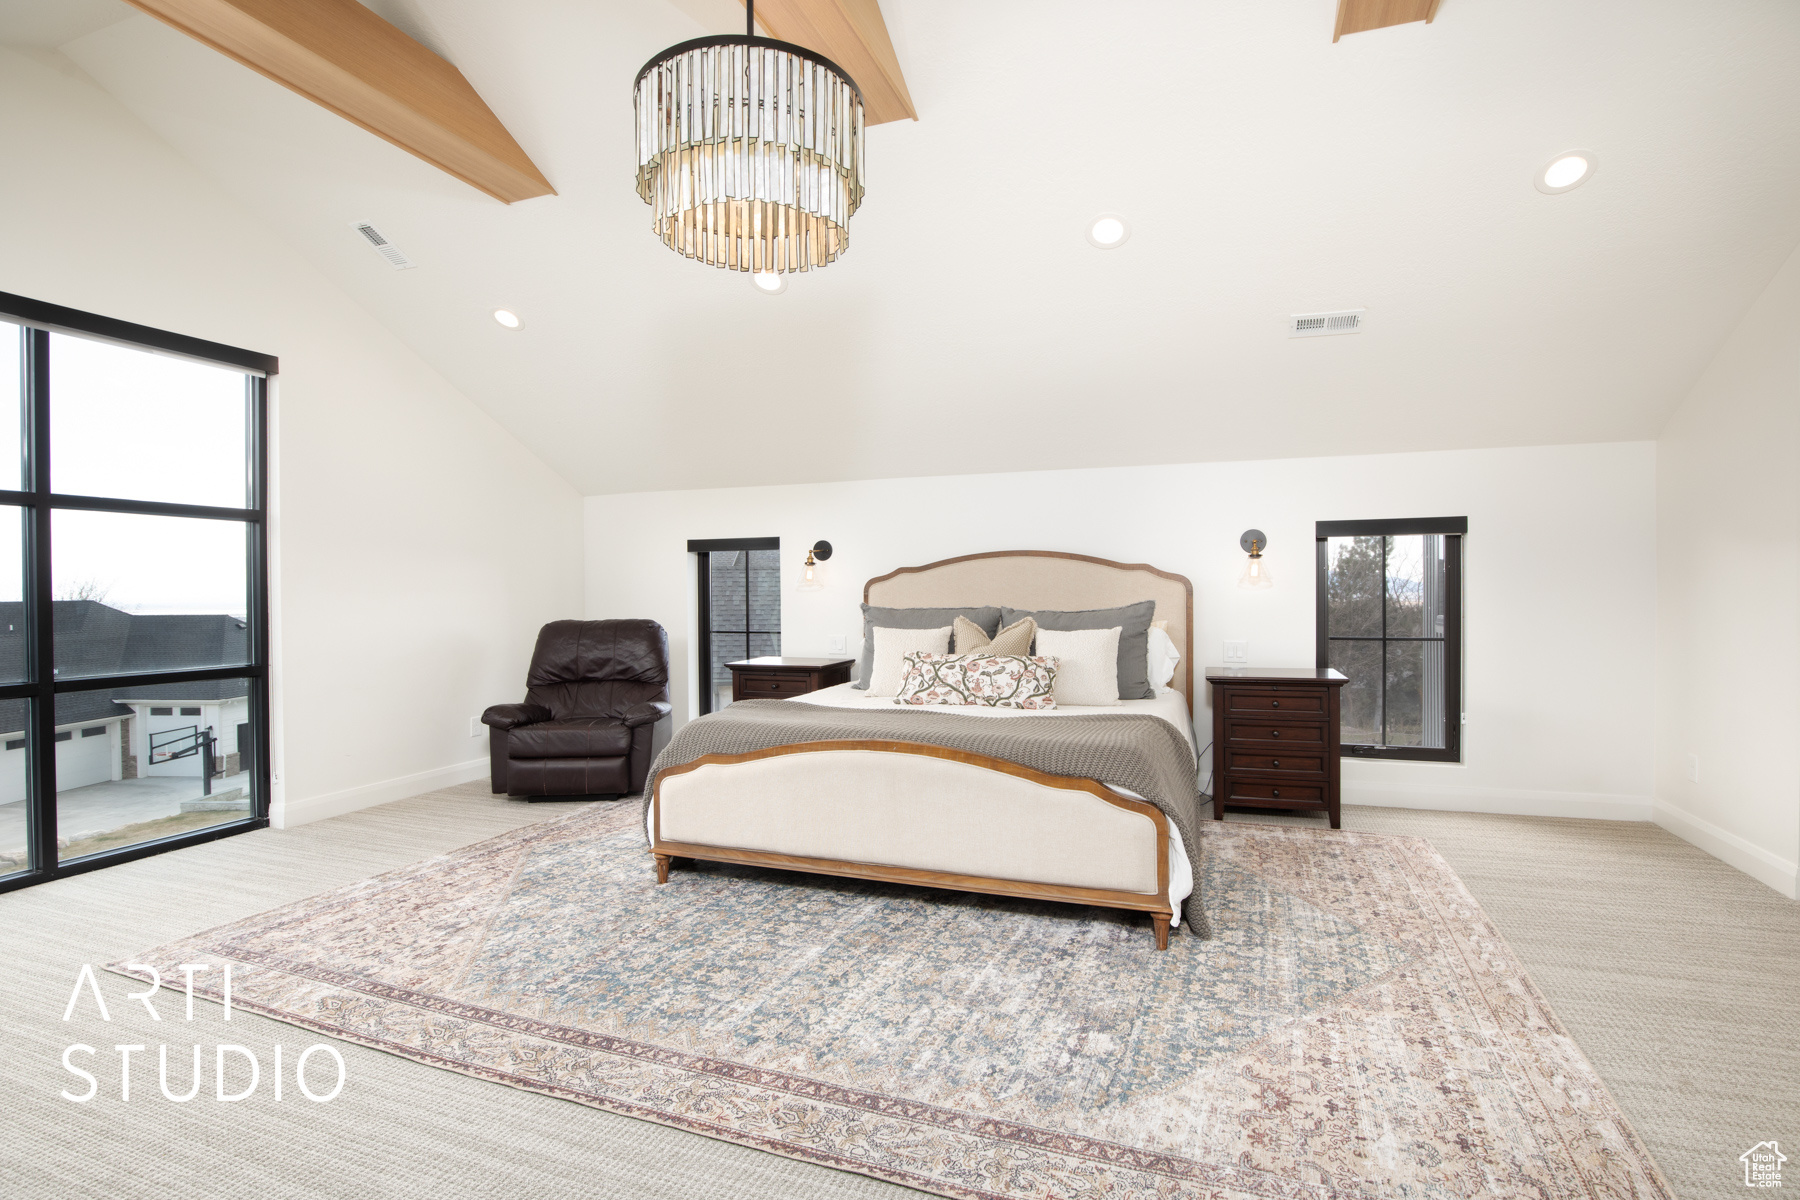 Primary bedroom featuring light colored carpet, a chandelier, high vaulted ceiling, and beam ceiling